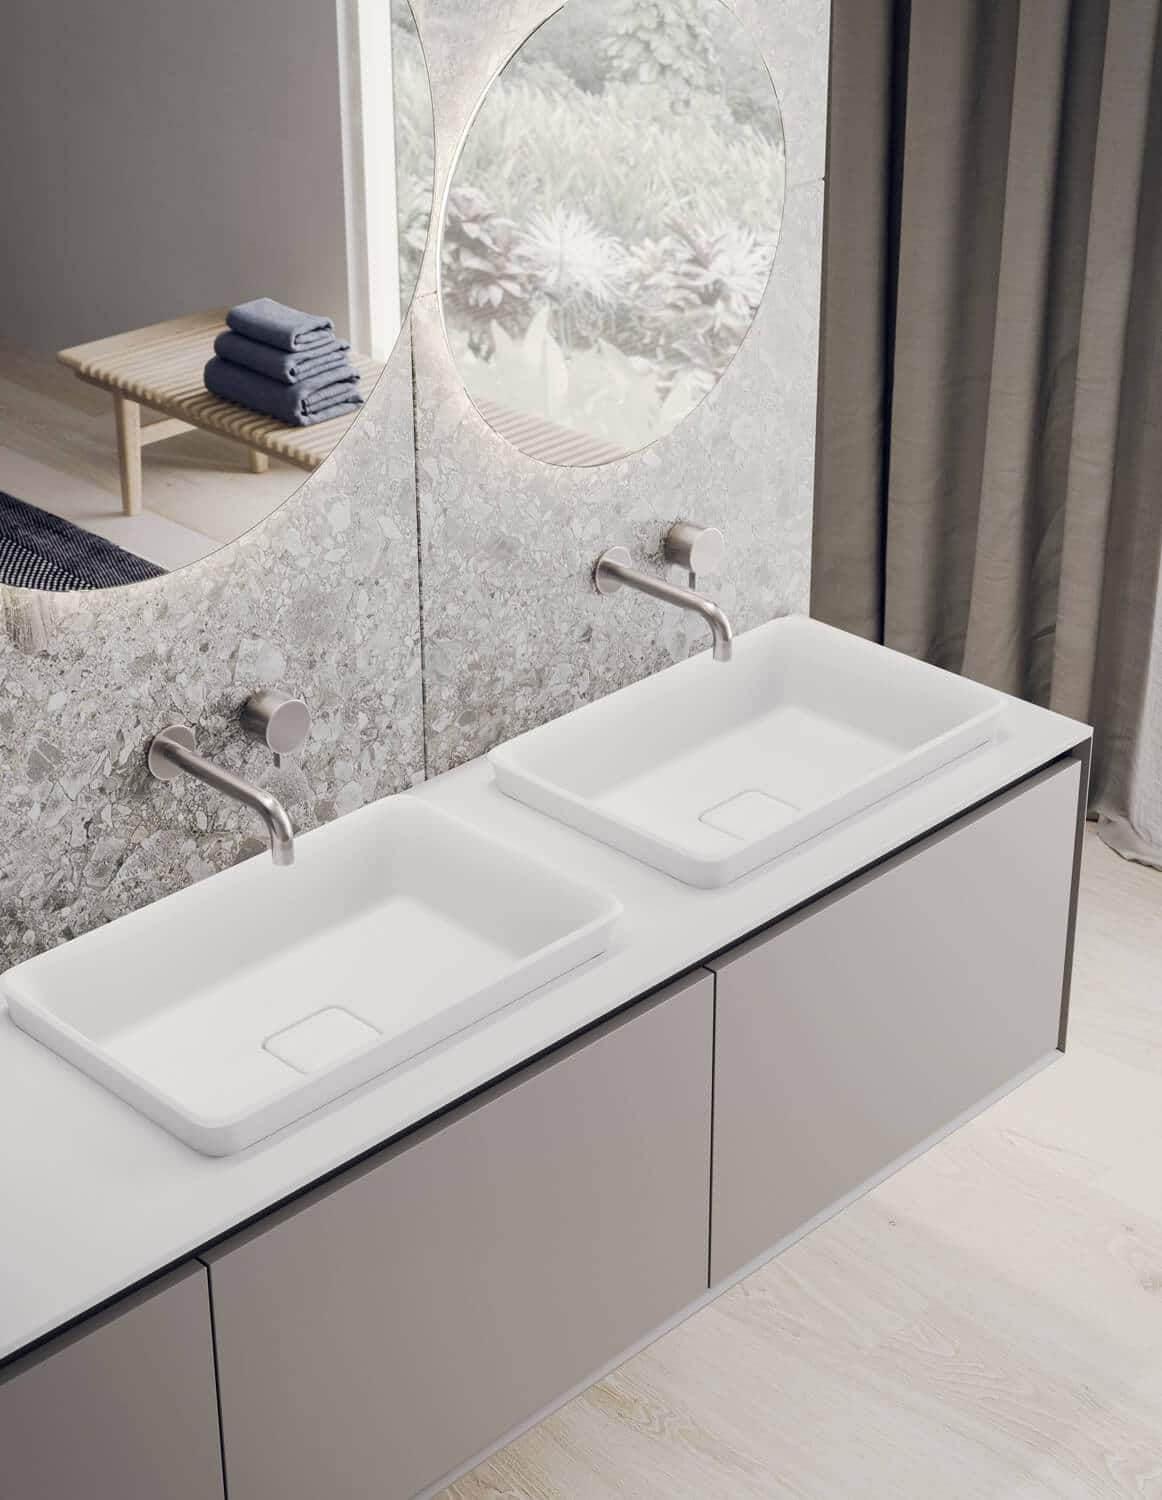 The semi-recessed washbasins in matte White teknorit are a modern touch and additional design element.